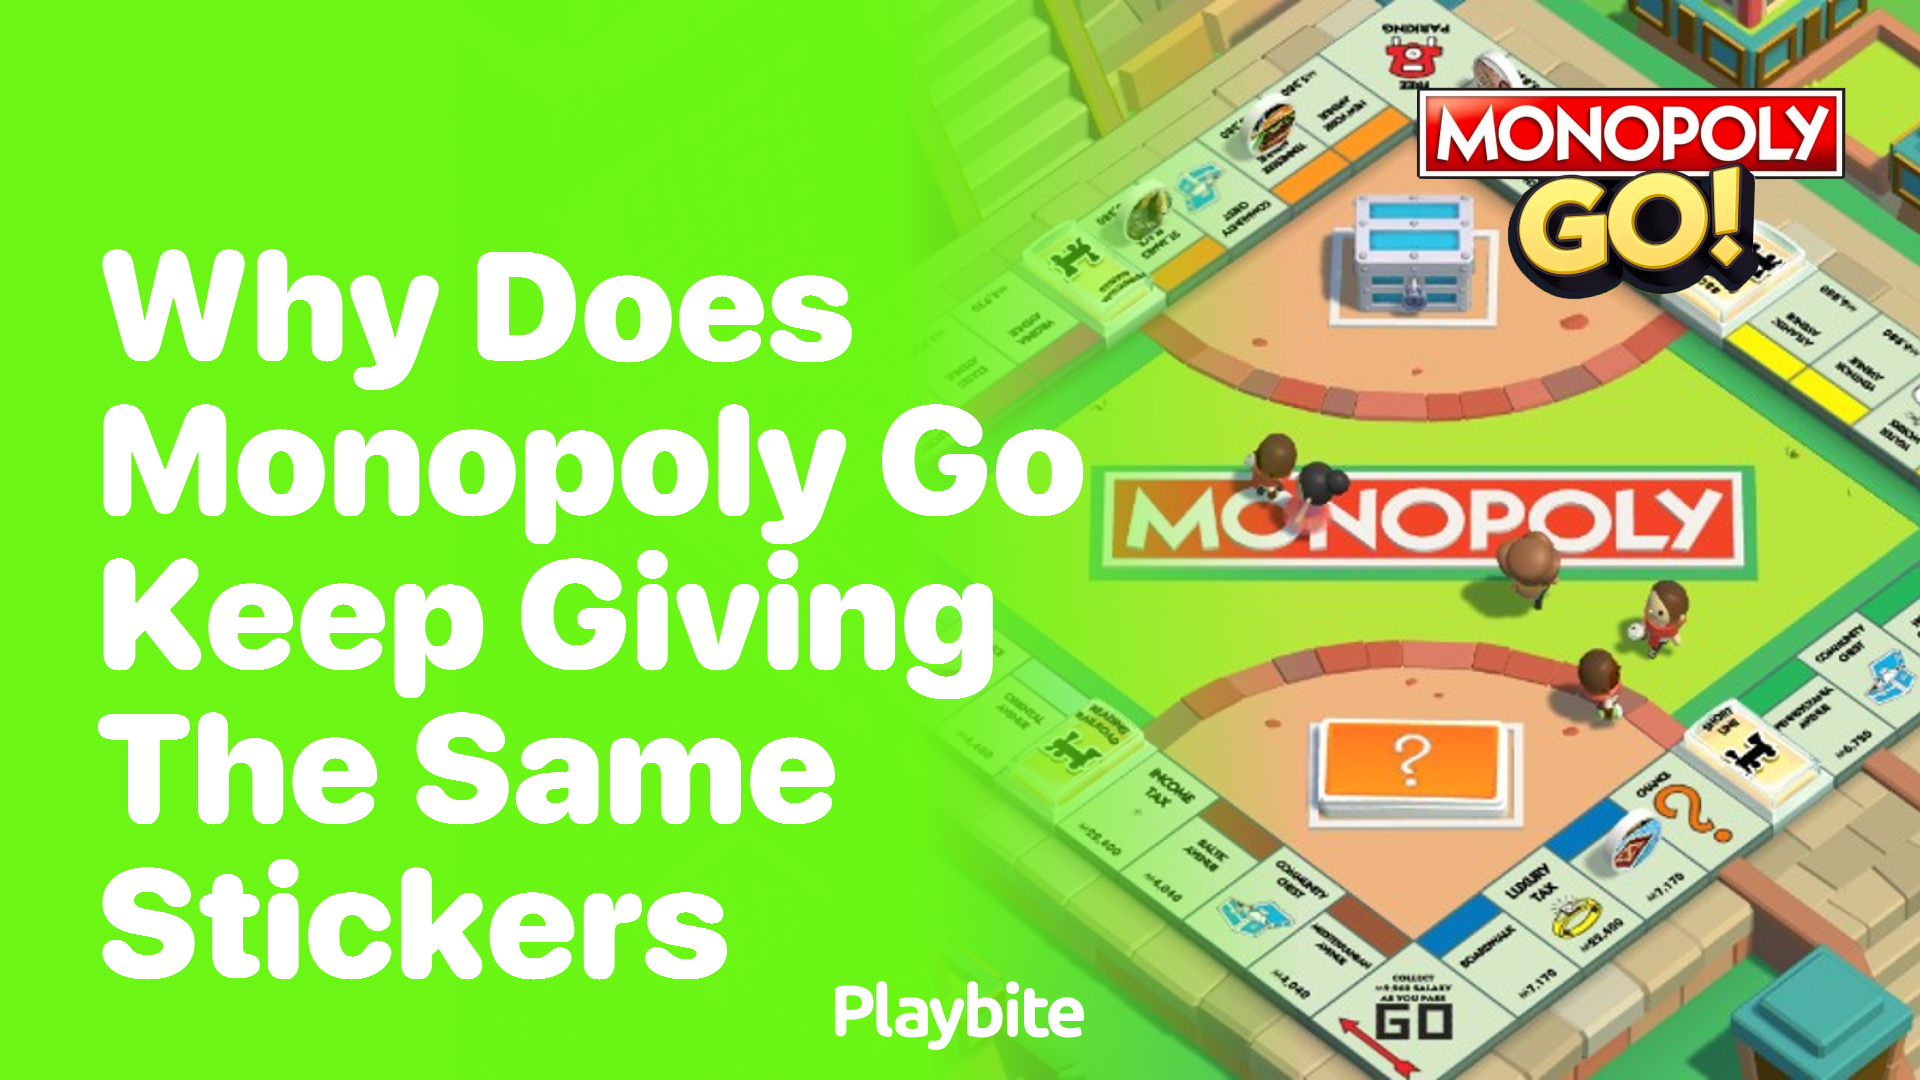 Why Does Monopoly Go Keep Giving the Same Stickers?